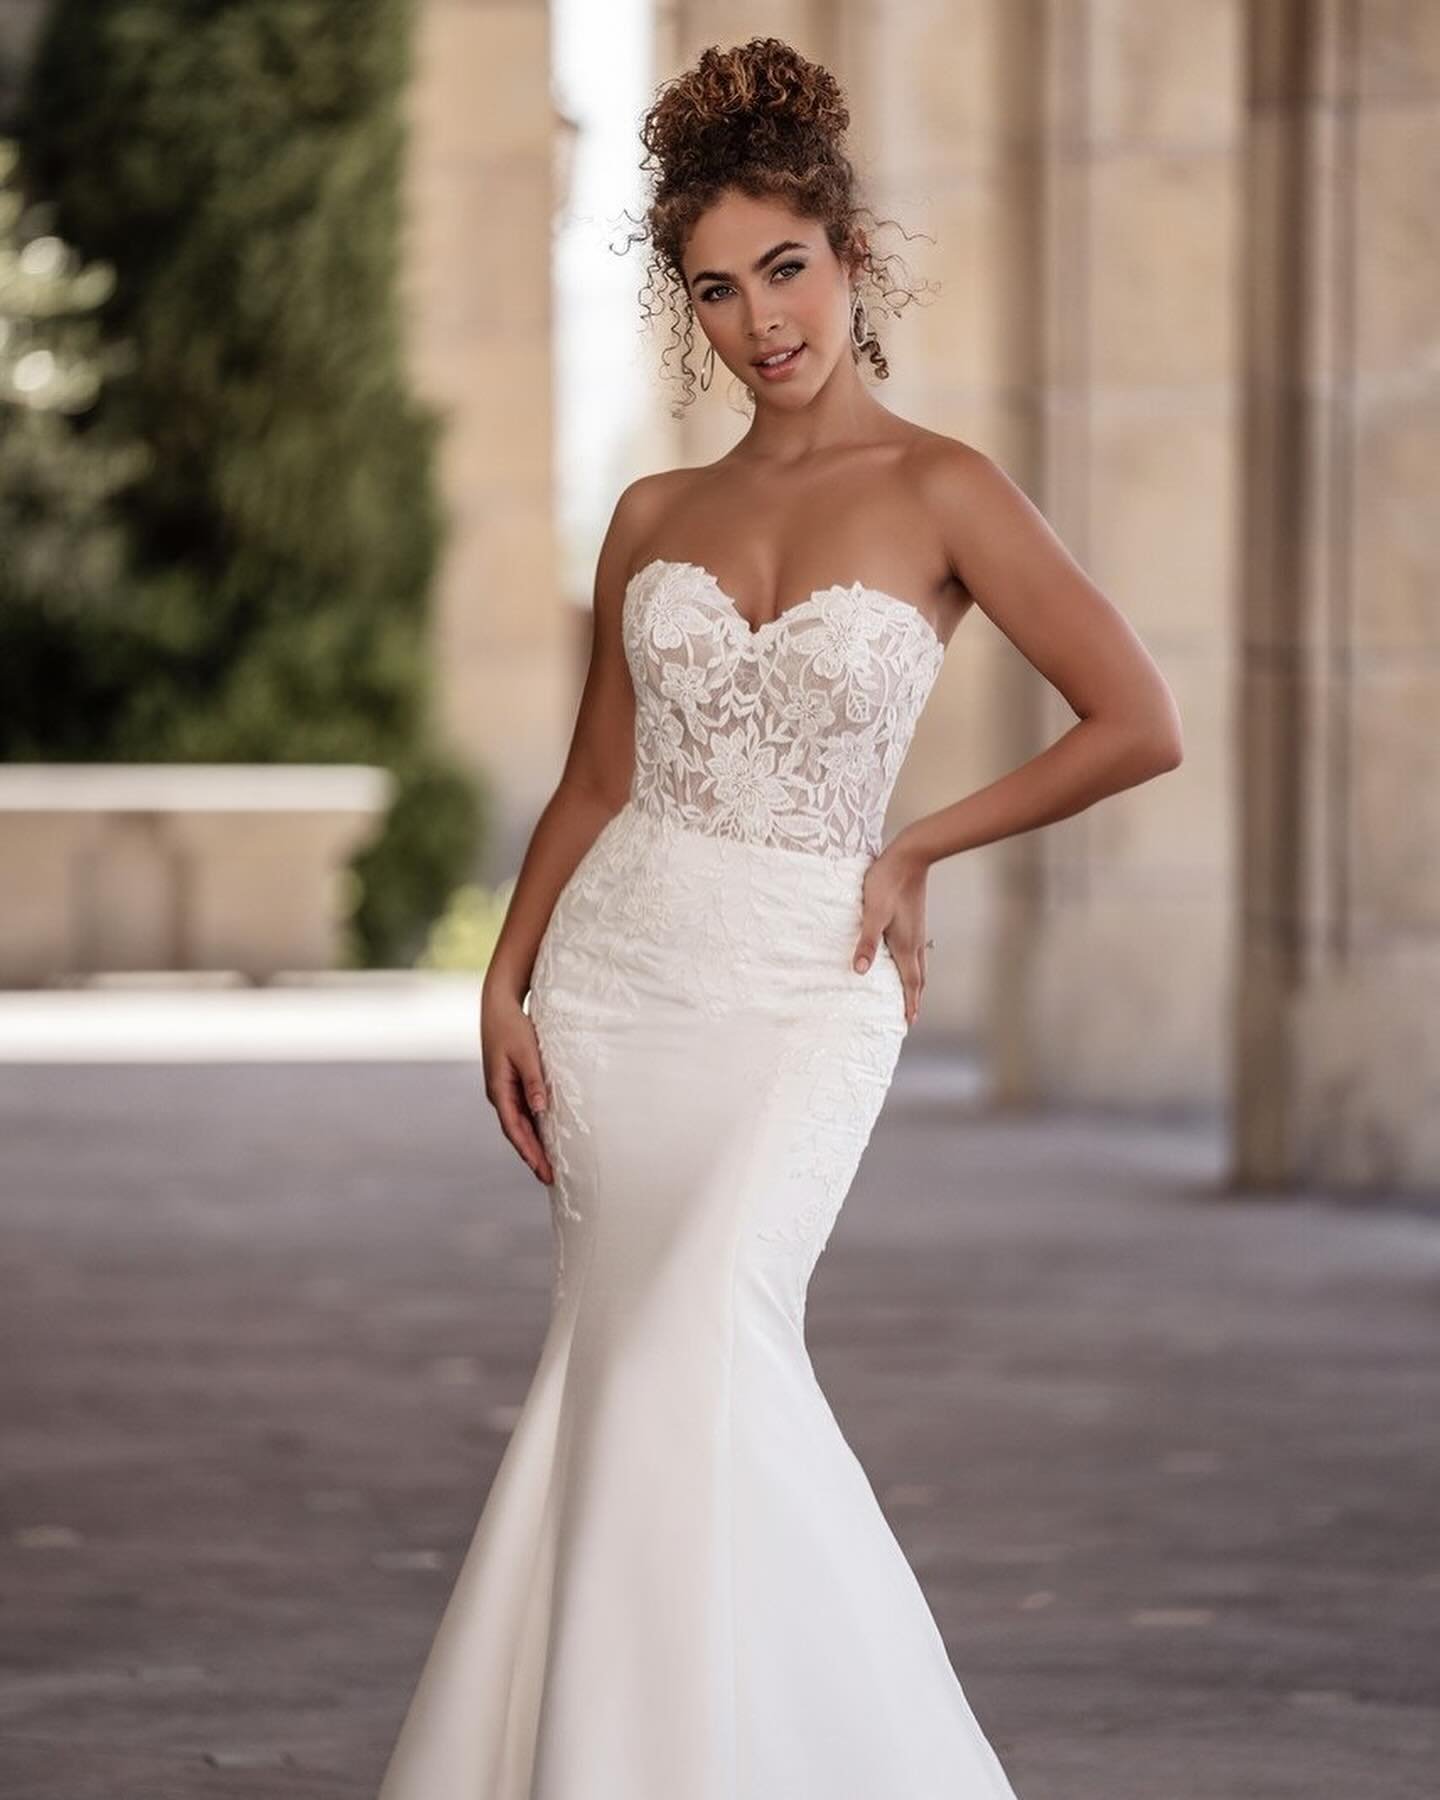 ✨Meet A1110!! ✨

She&rsquo;s a form-fitting stretch Mikado fit and flare style with strapless sweetheart neckline, illusion bodice and statement train with cutout lace detailing!!

Available to try on and order in store now!